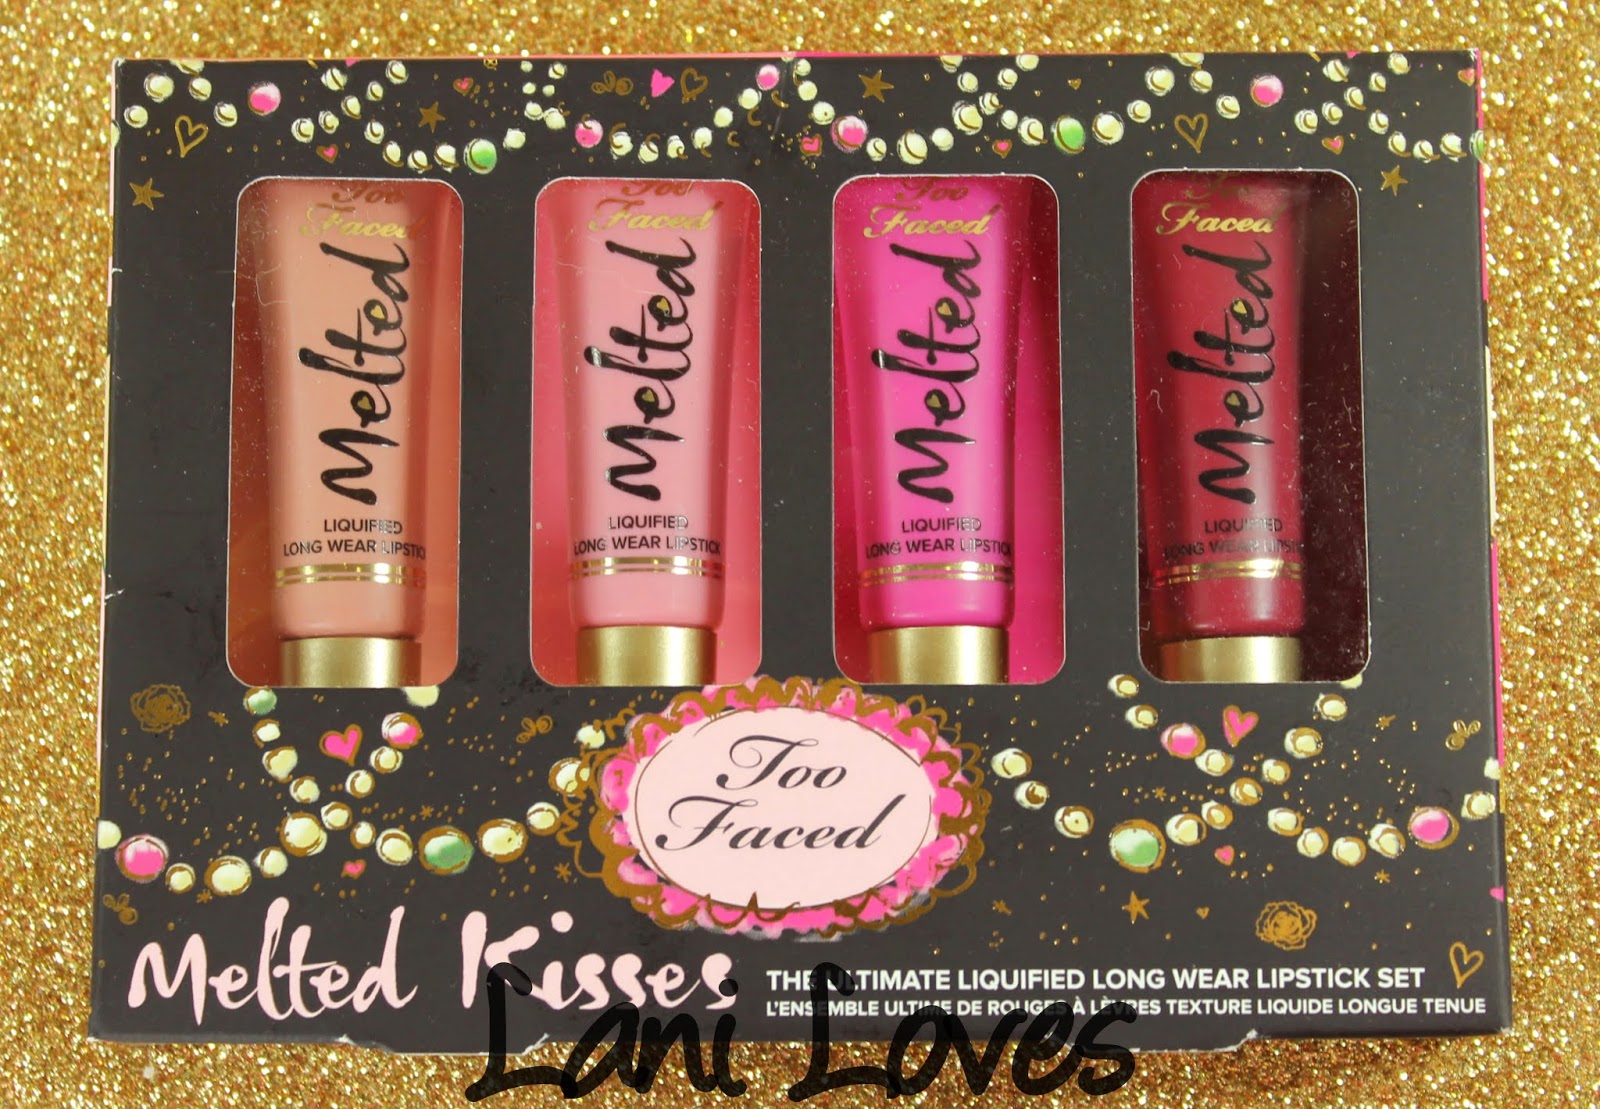 Too Faced Melted Kisses Set Swatches & Review